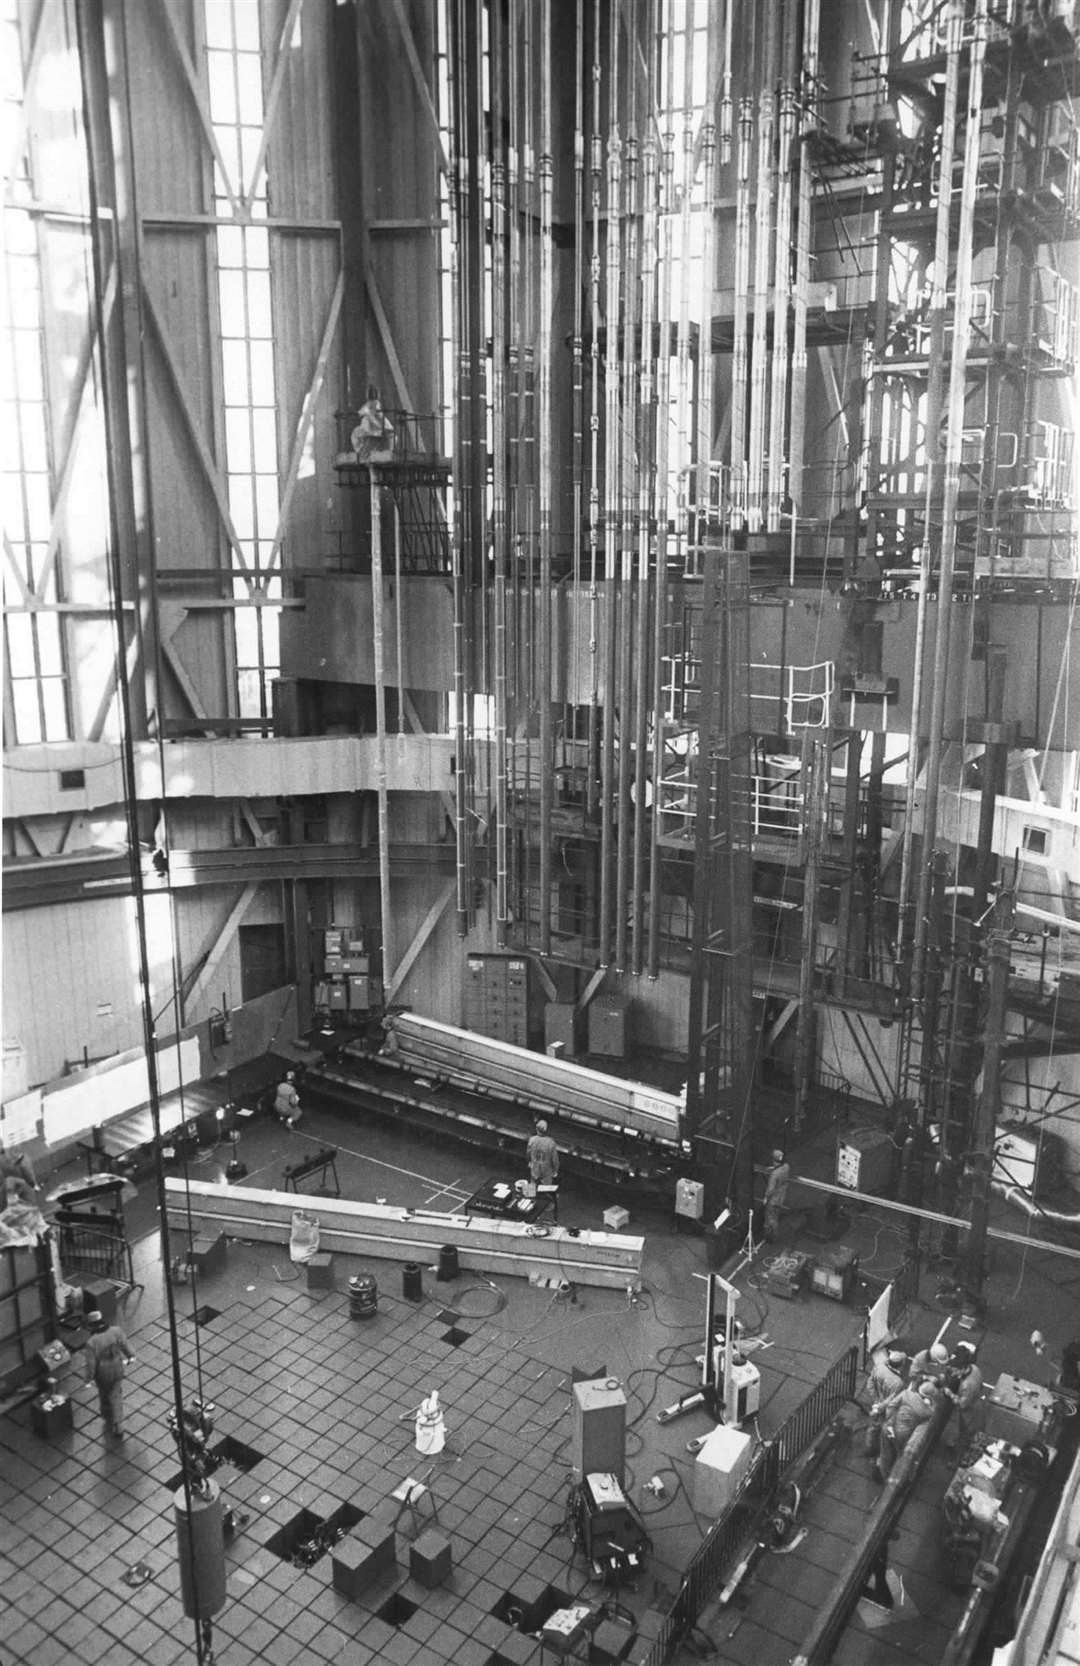 Construction well underway at Dungeness B Power Station in November 1981 - it began operation two years later